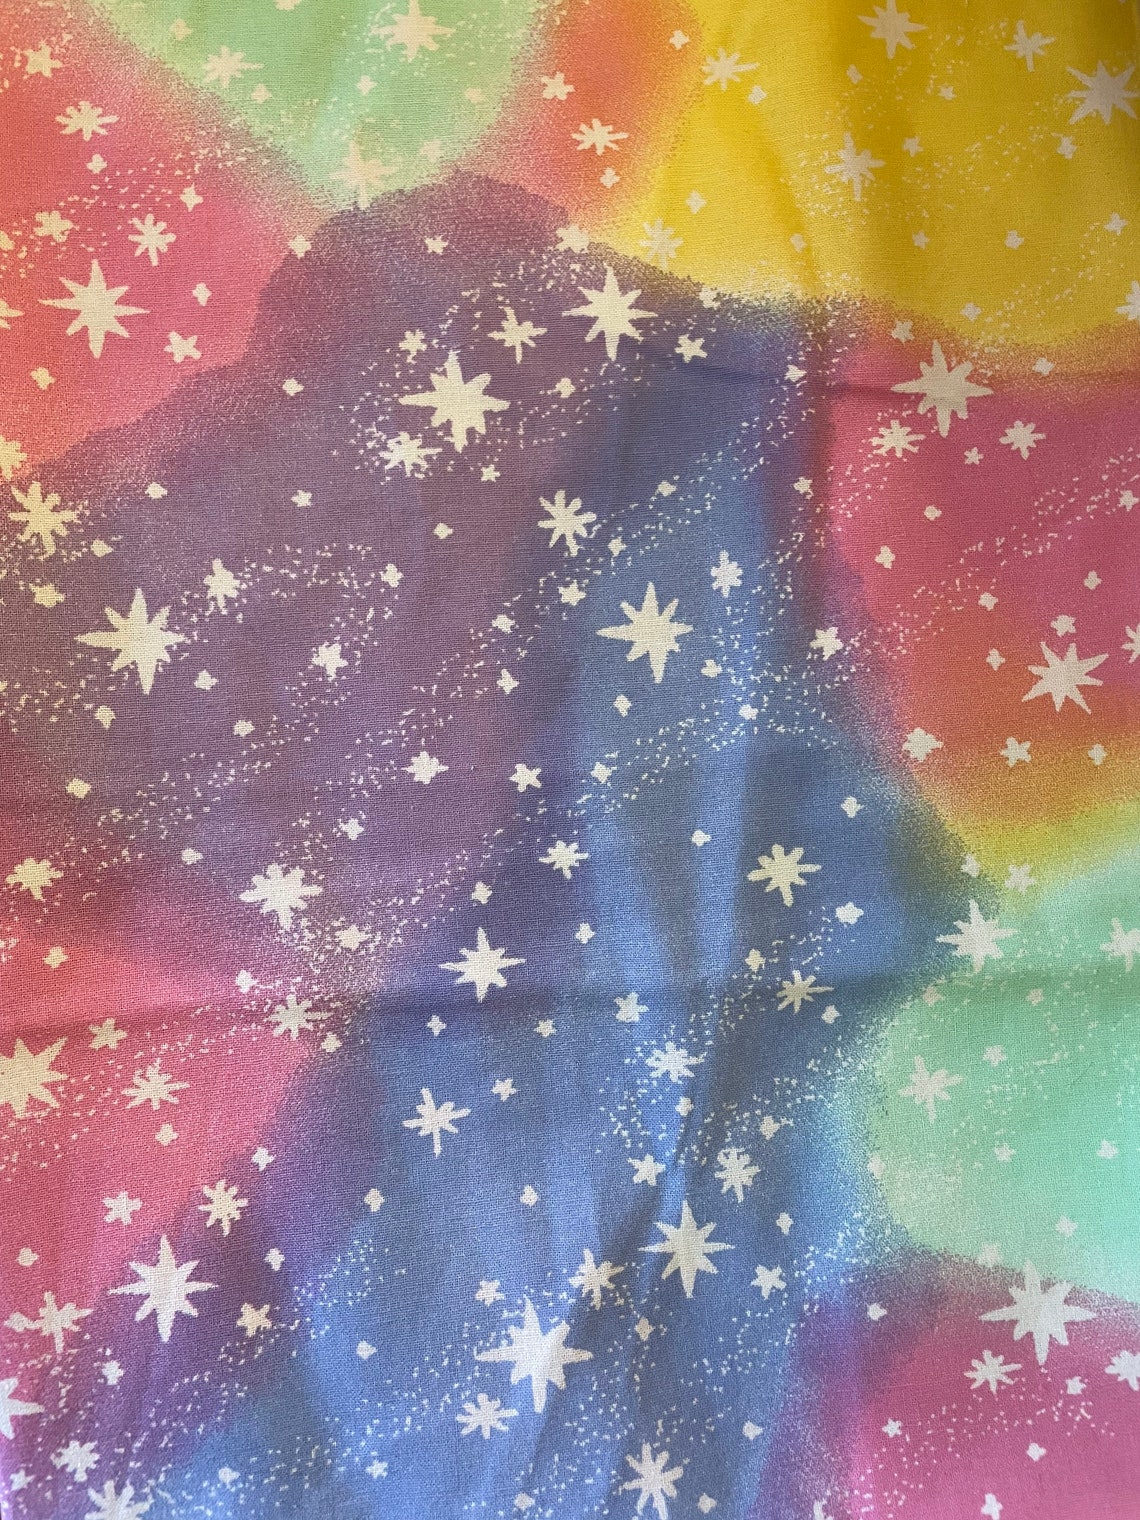 Galaxy Space Pastel Cat and Kitten Over the collar bandanna | Etsy